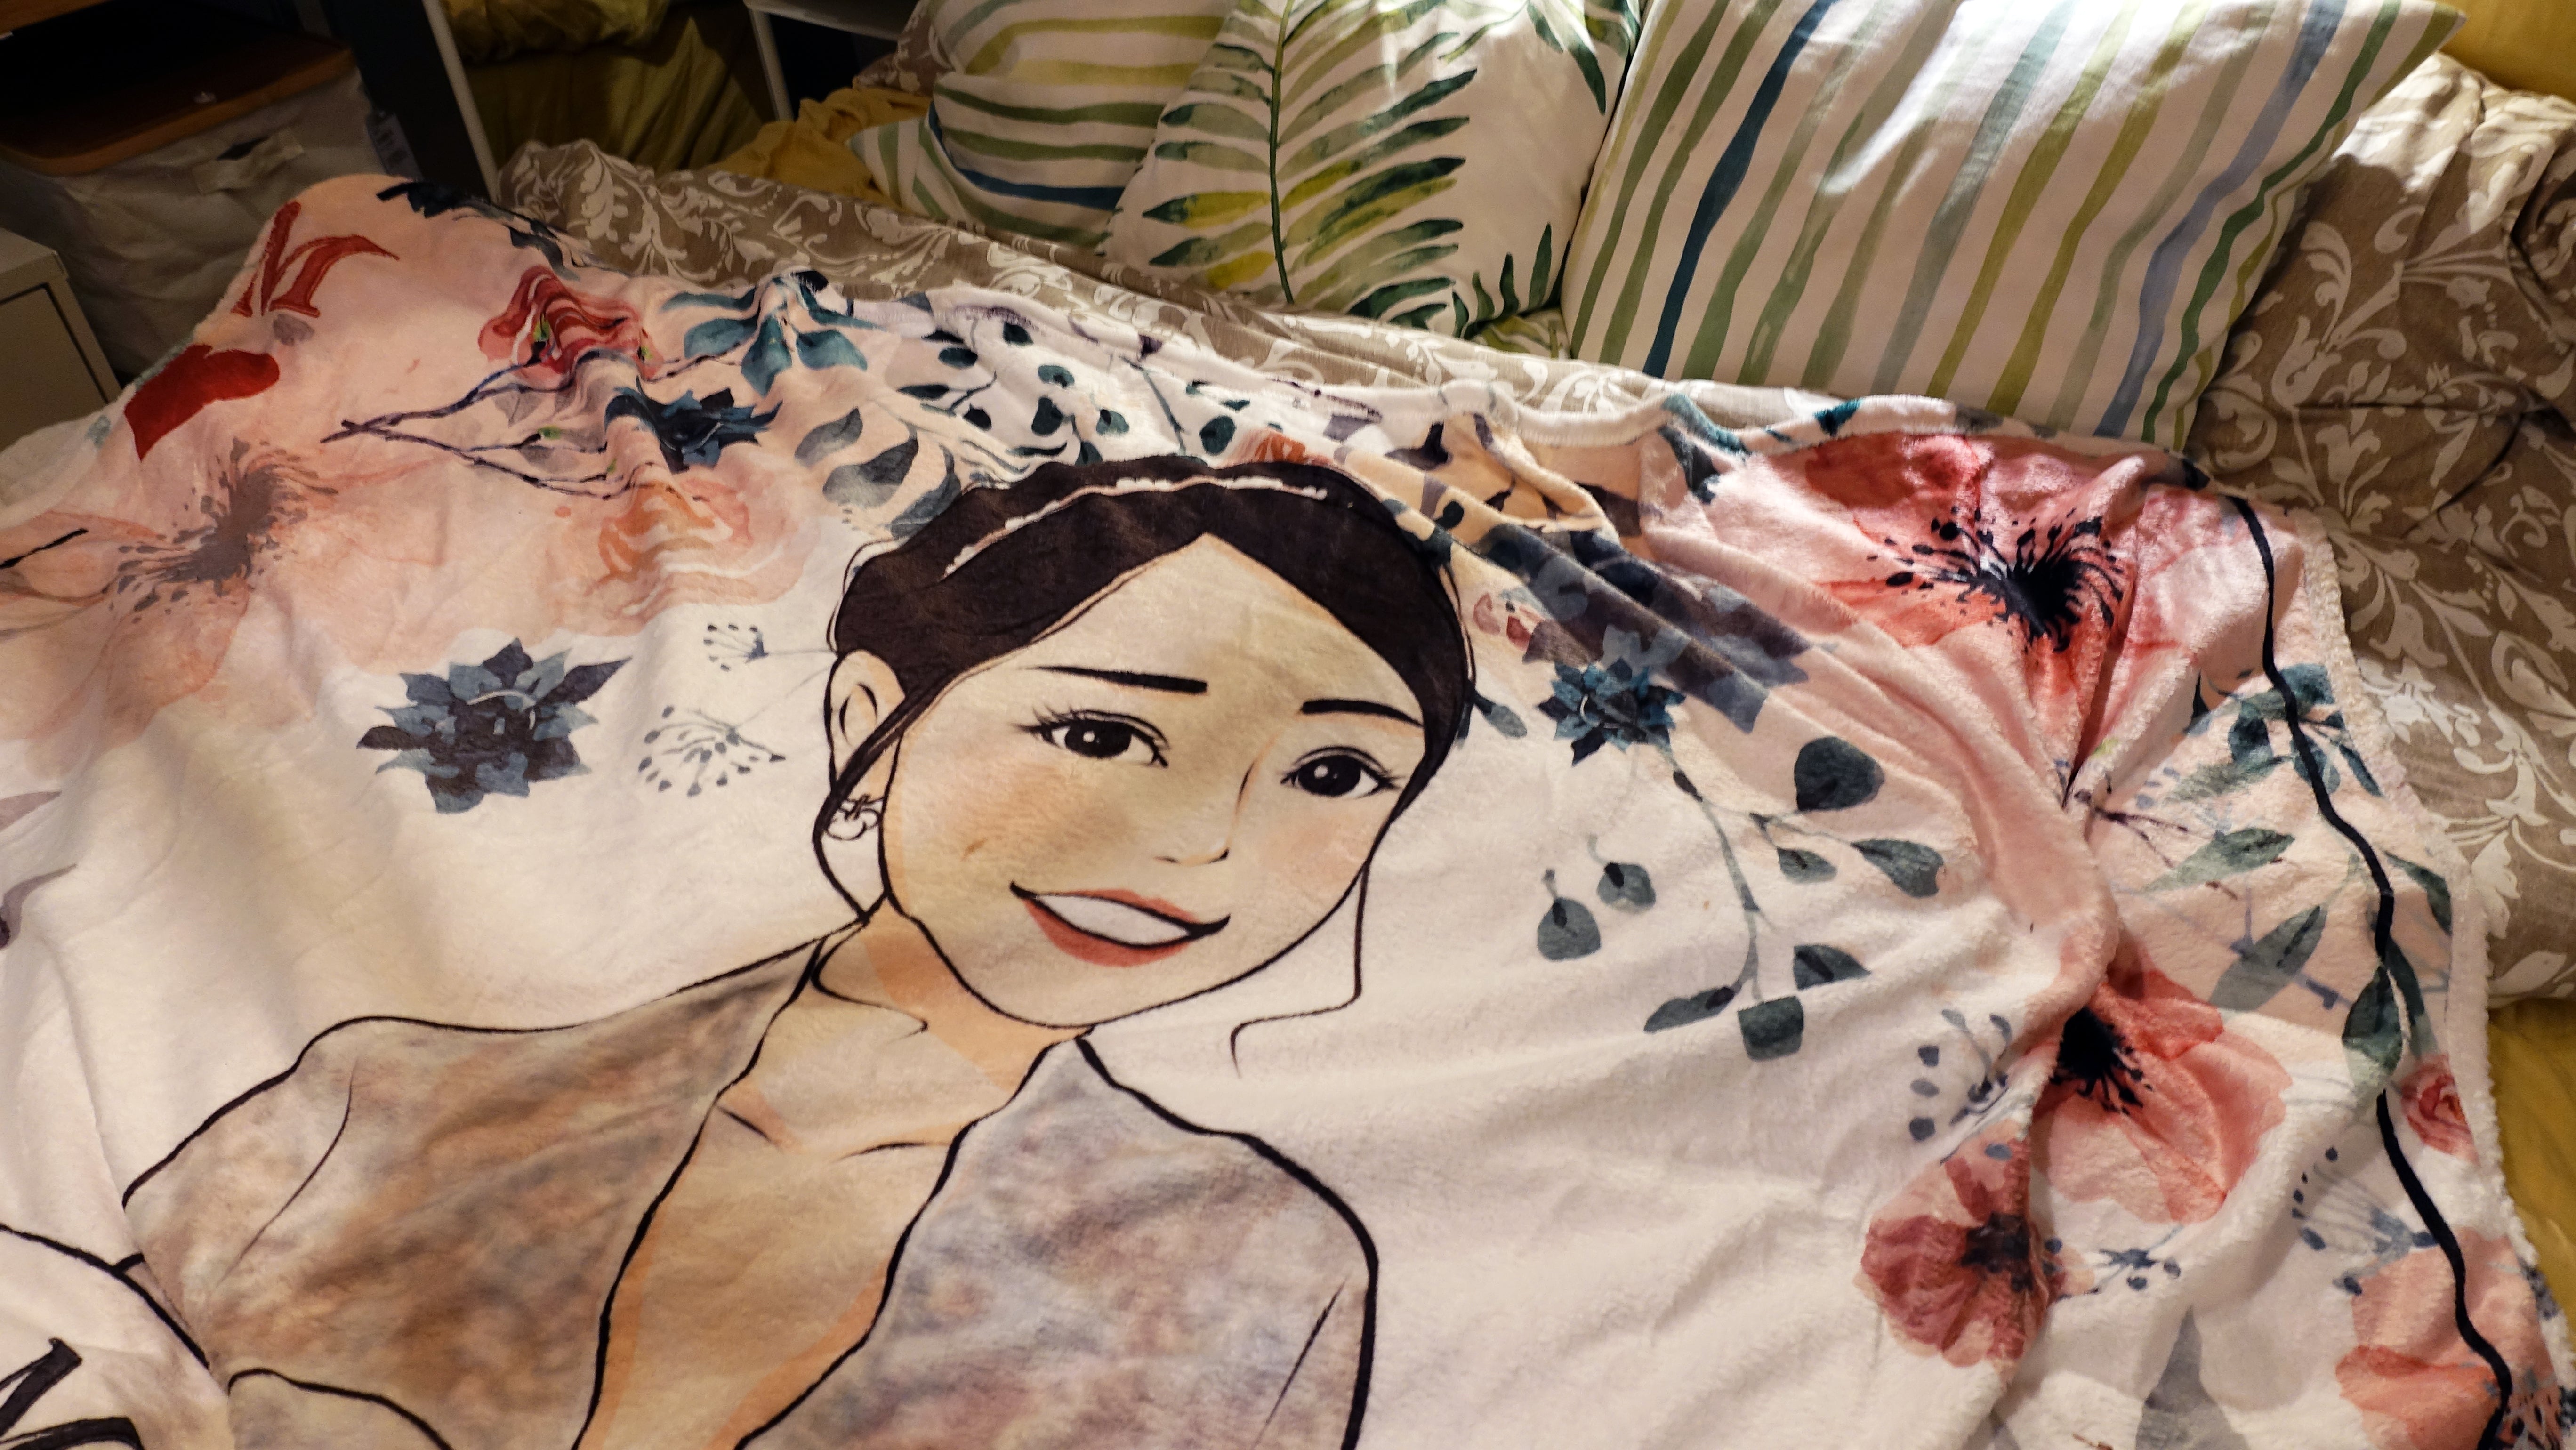 King & Queen x Pink Flower款式客製化插畫毛毯  King & Queen x Pink Flower Theme - Custom Blanket with tailor-made illustration. - HKGIFTFORU